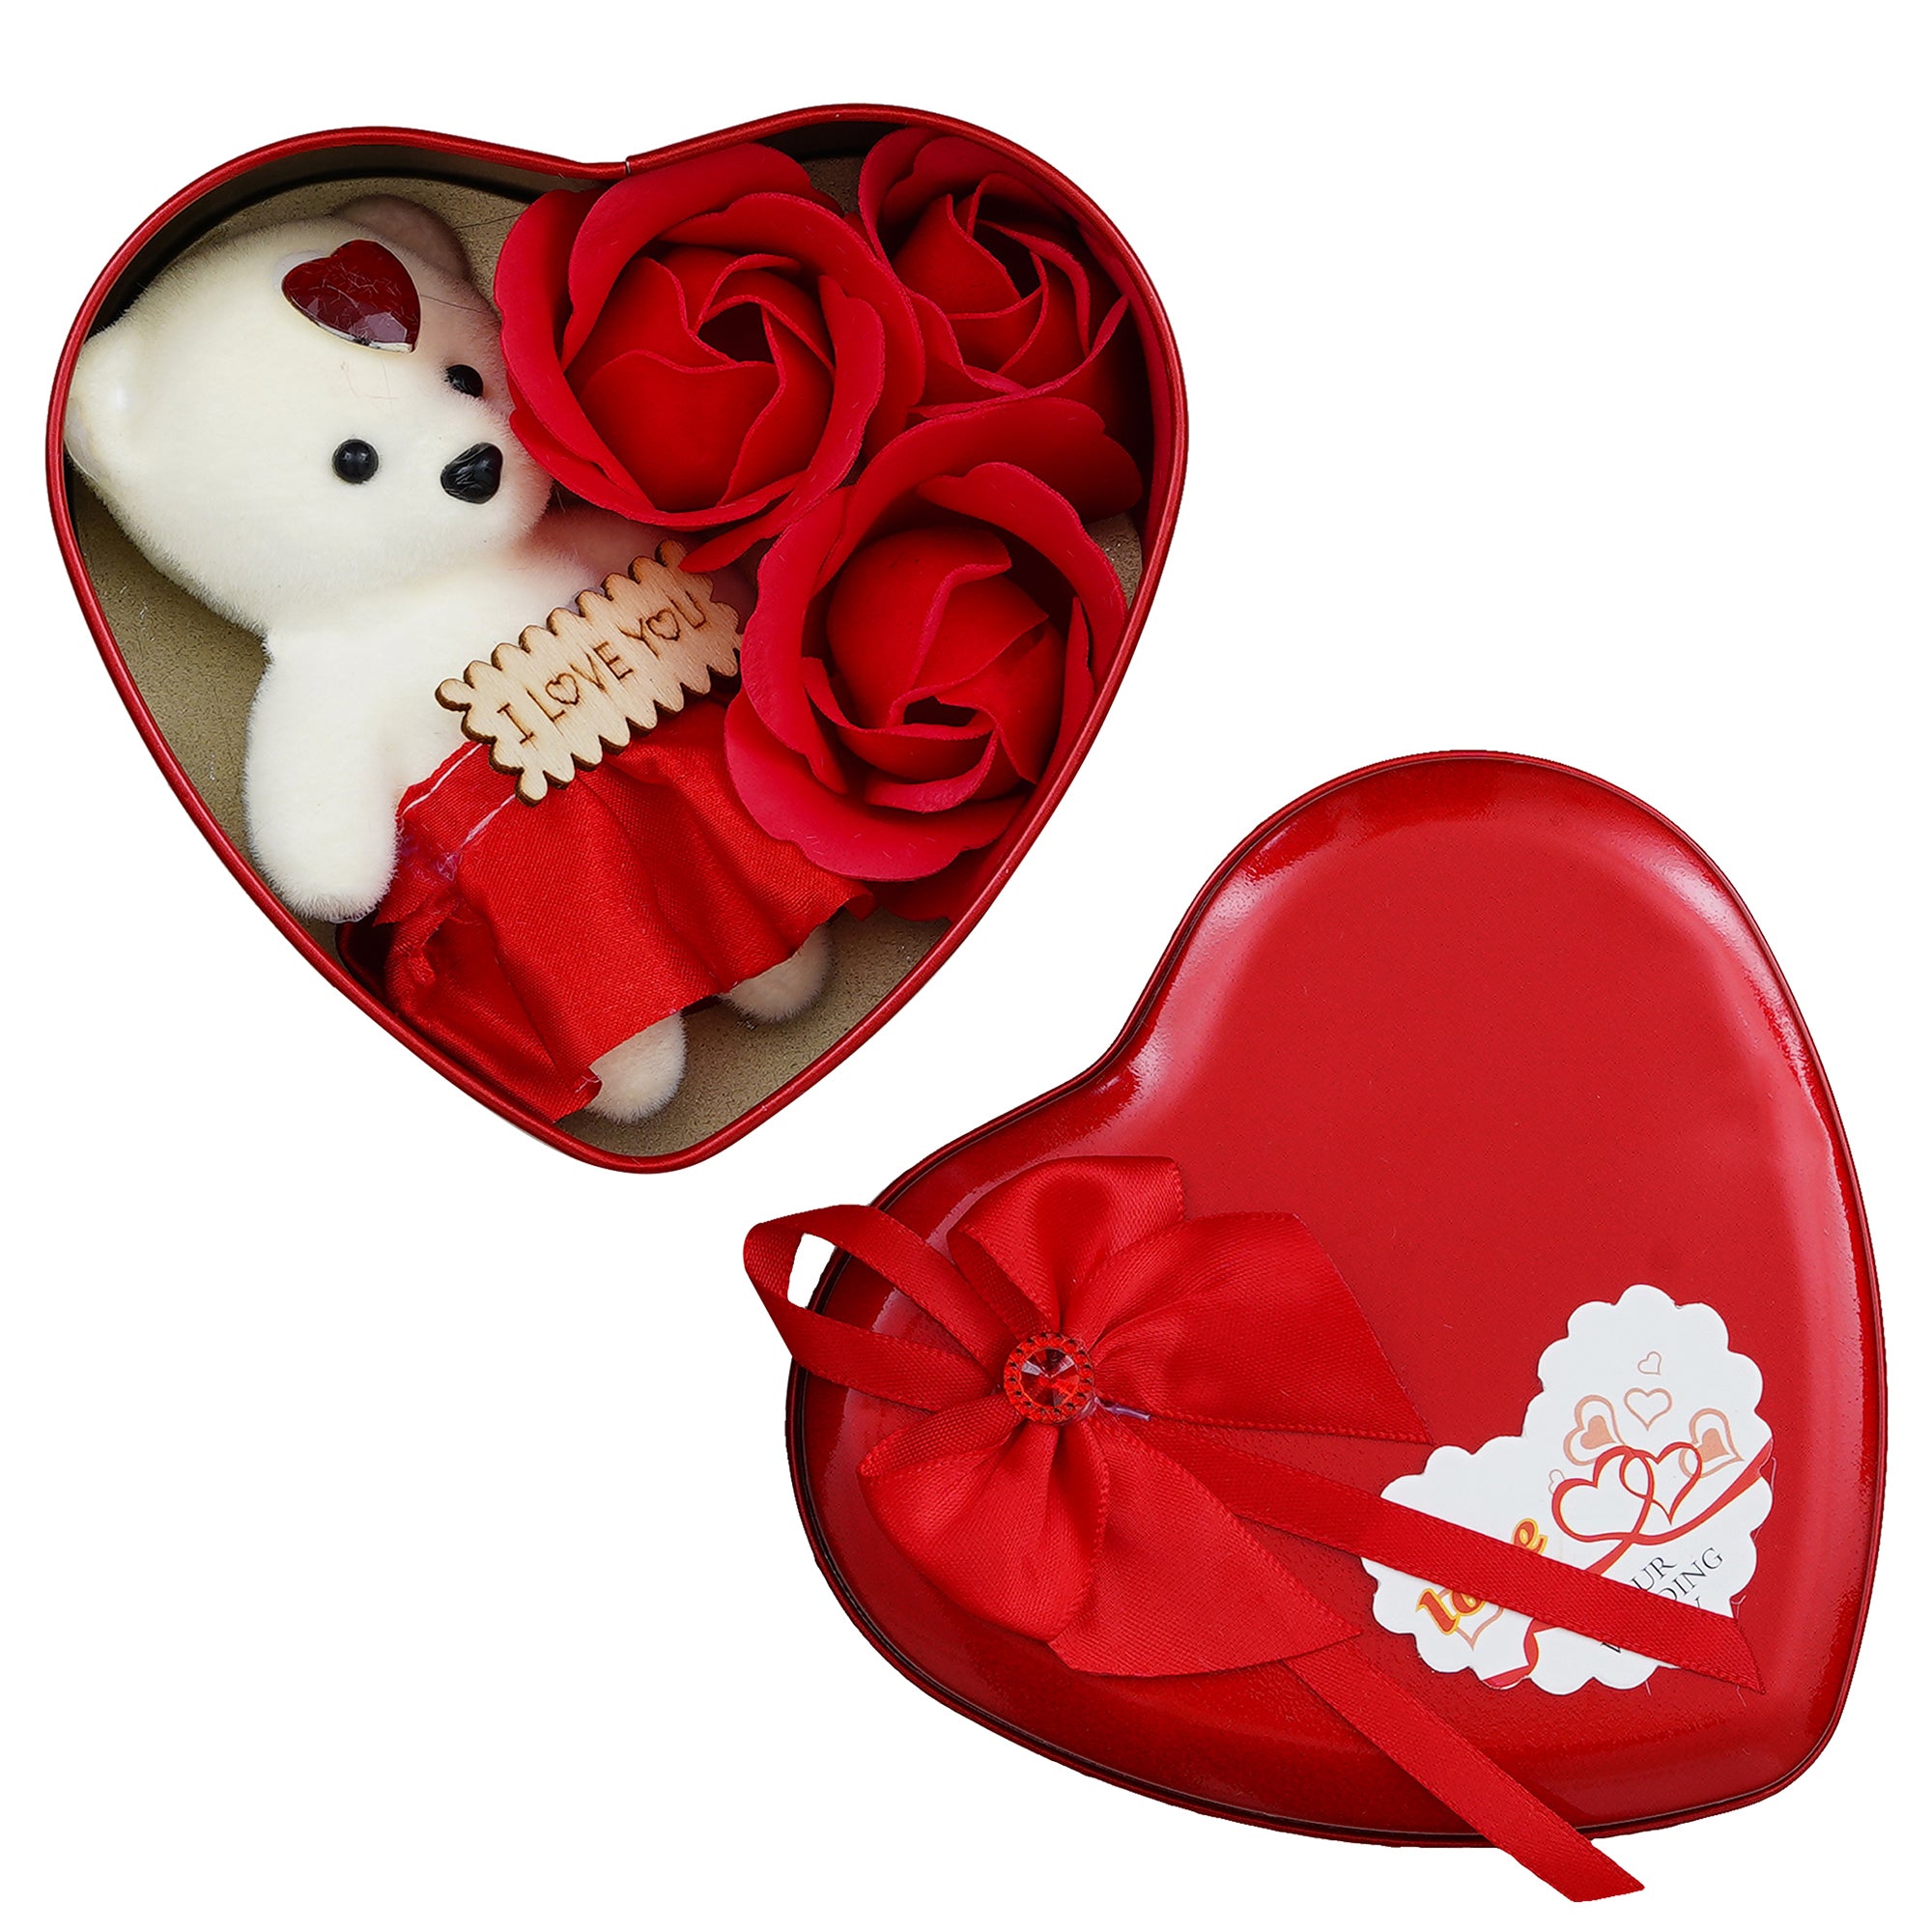 Red Roses and Teddy Bear Valentine's Heart Shaped Gift Box 3